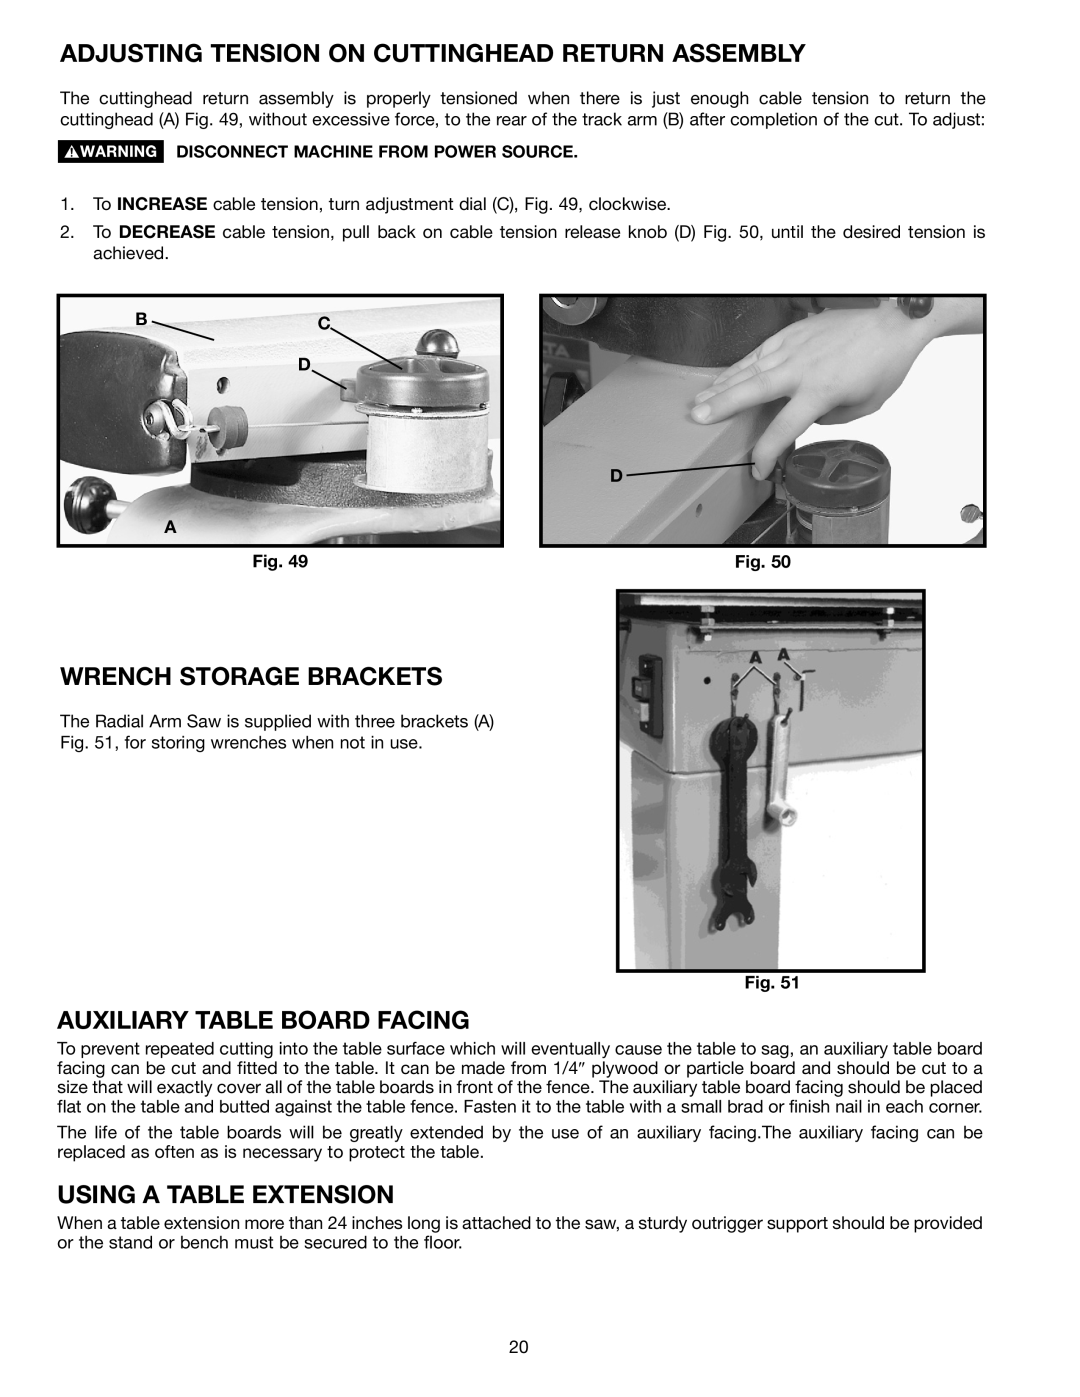 Porter-Cable 33-403, 16 Adjusting Tension On Cuttinghead Return Assembly, Wrench Storage Brackets, Using A Table Extension 